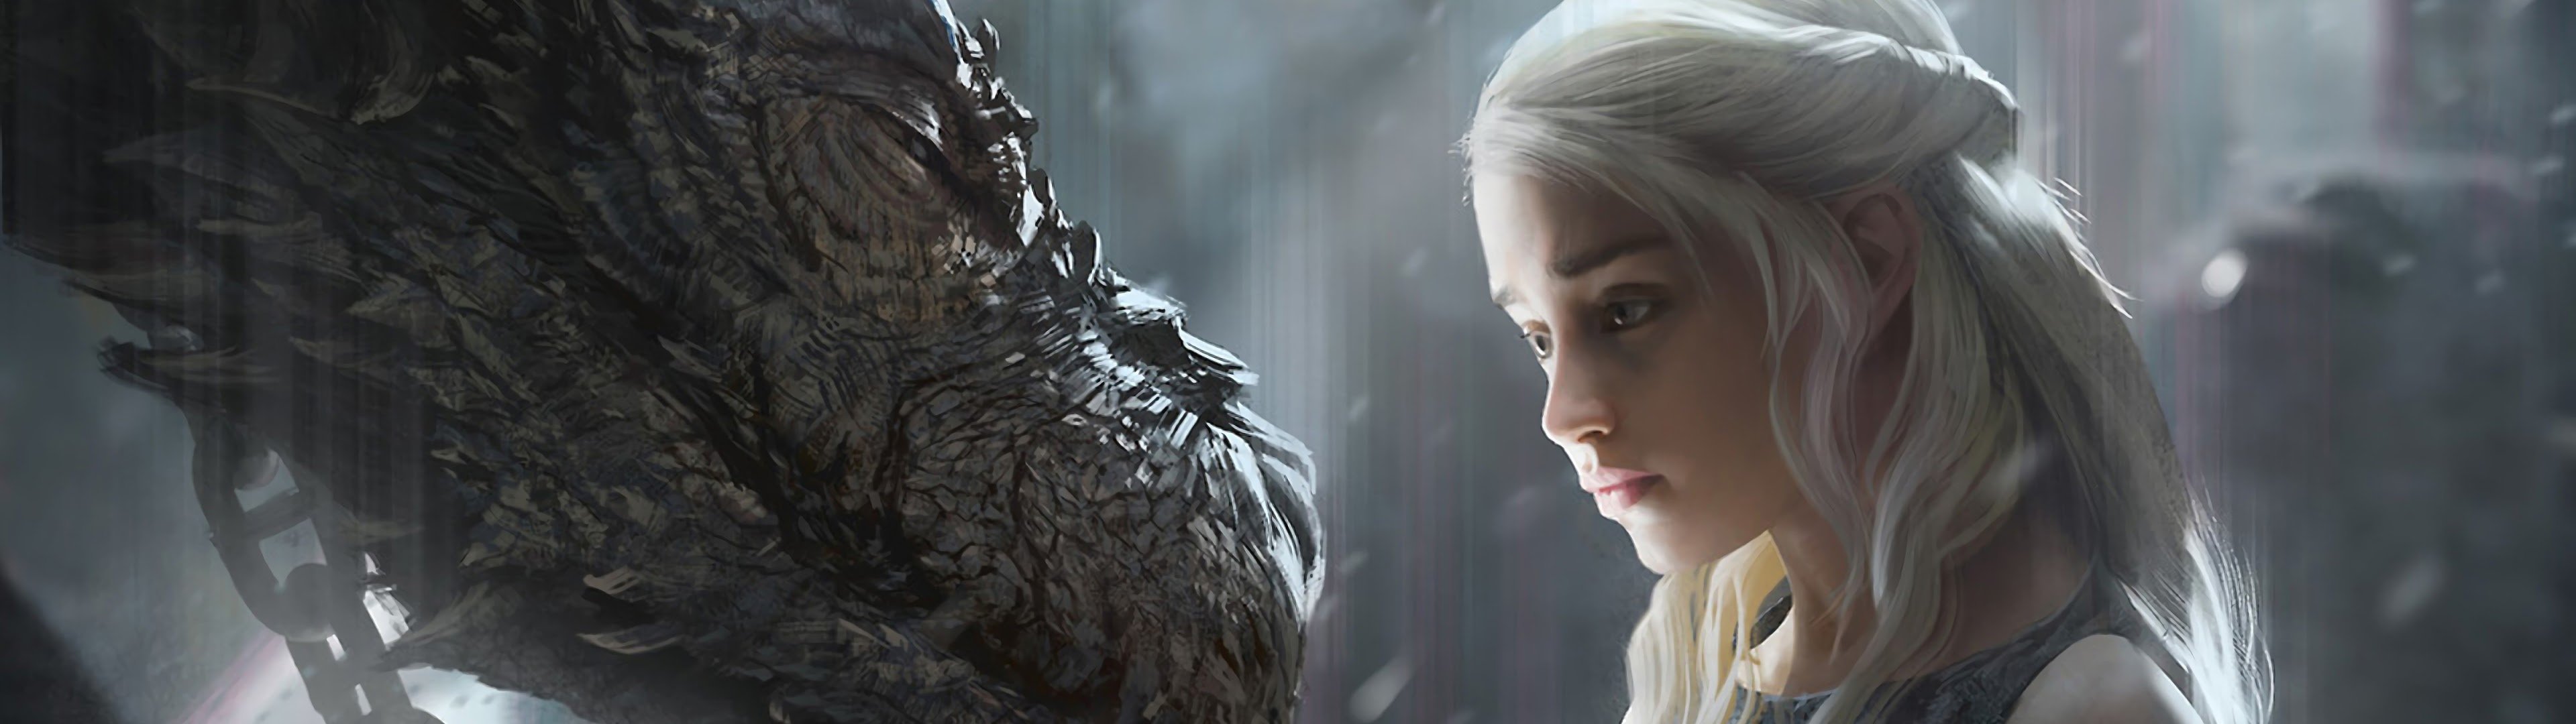 Game of Thrones 3840x1080 Wallpaper Free Game of Thrones 3840x1080 Background